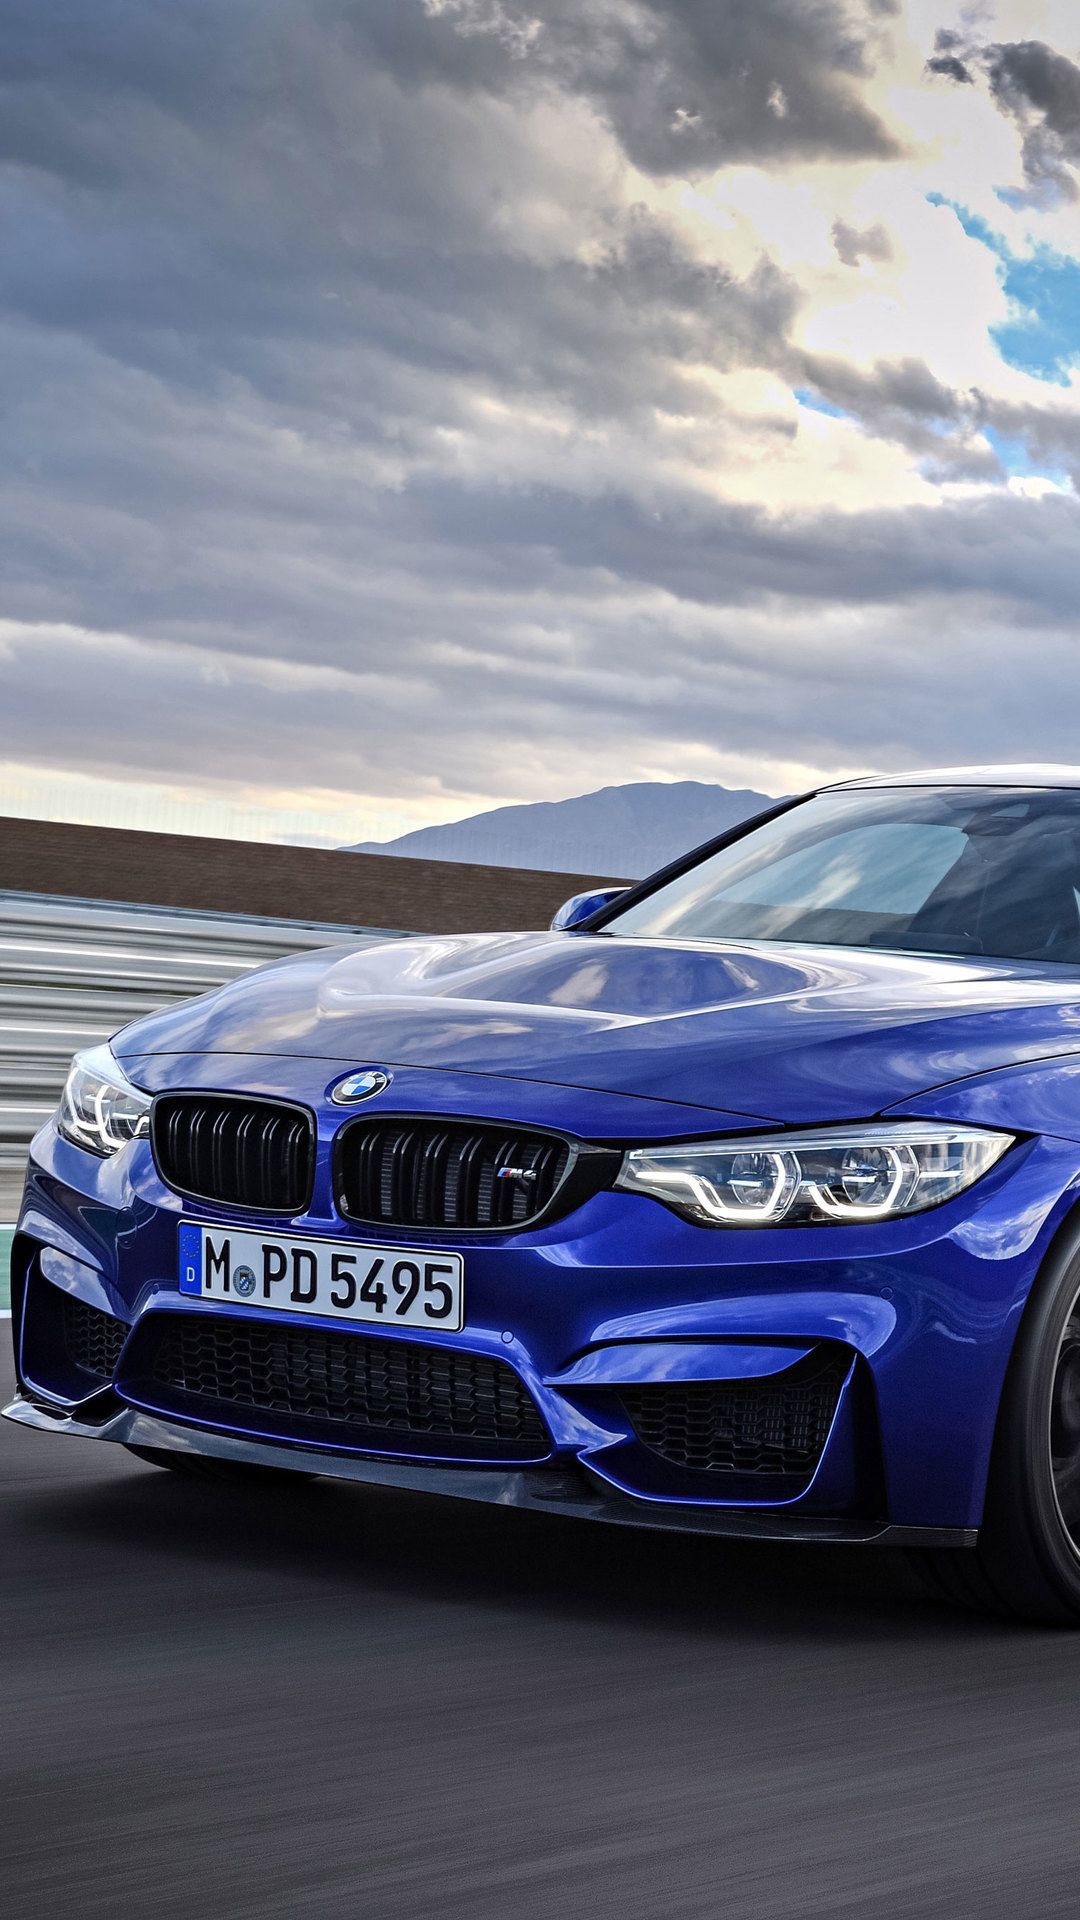 Bmw M4 Wallpaper Full HD Hupages Download iPhone Wallpaper